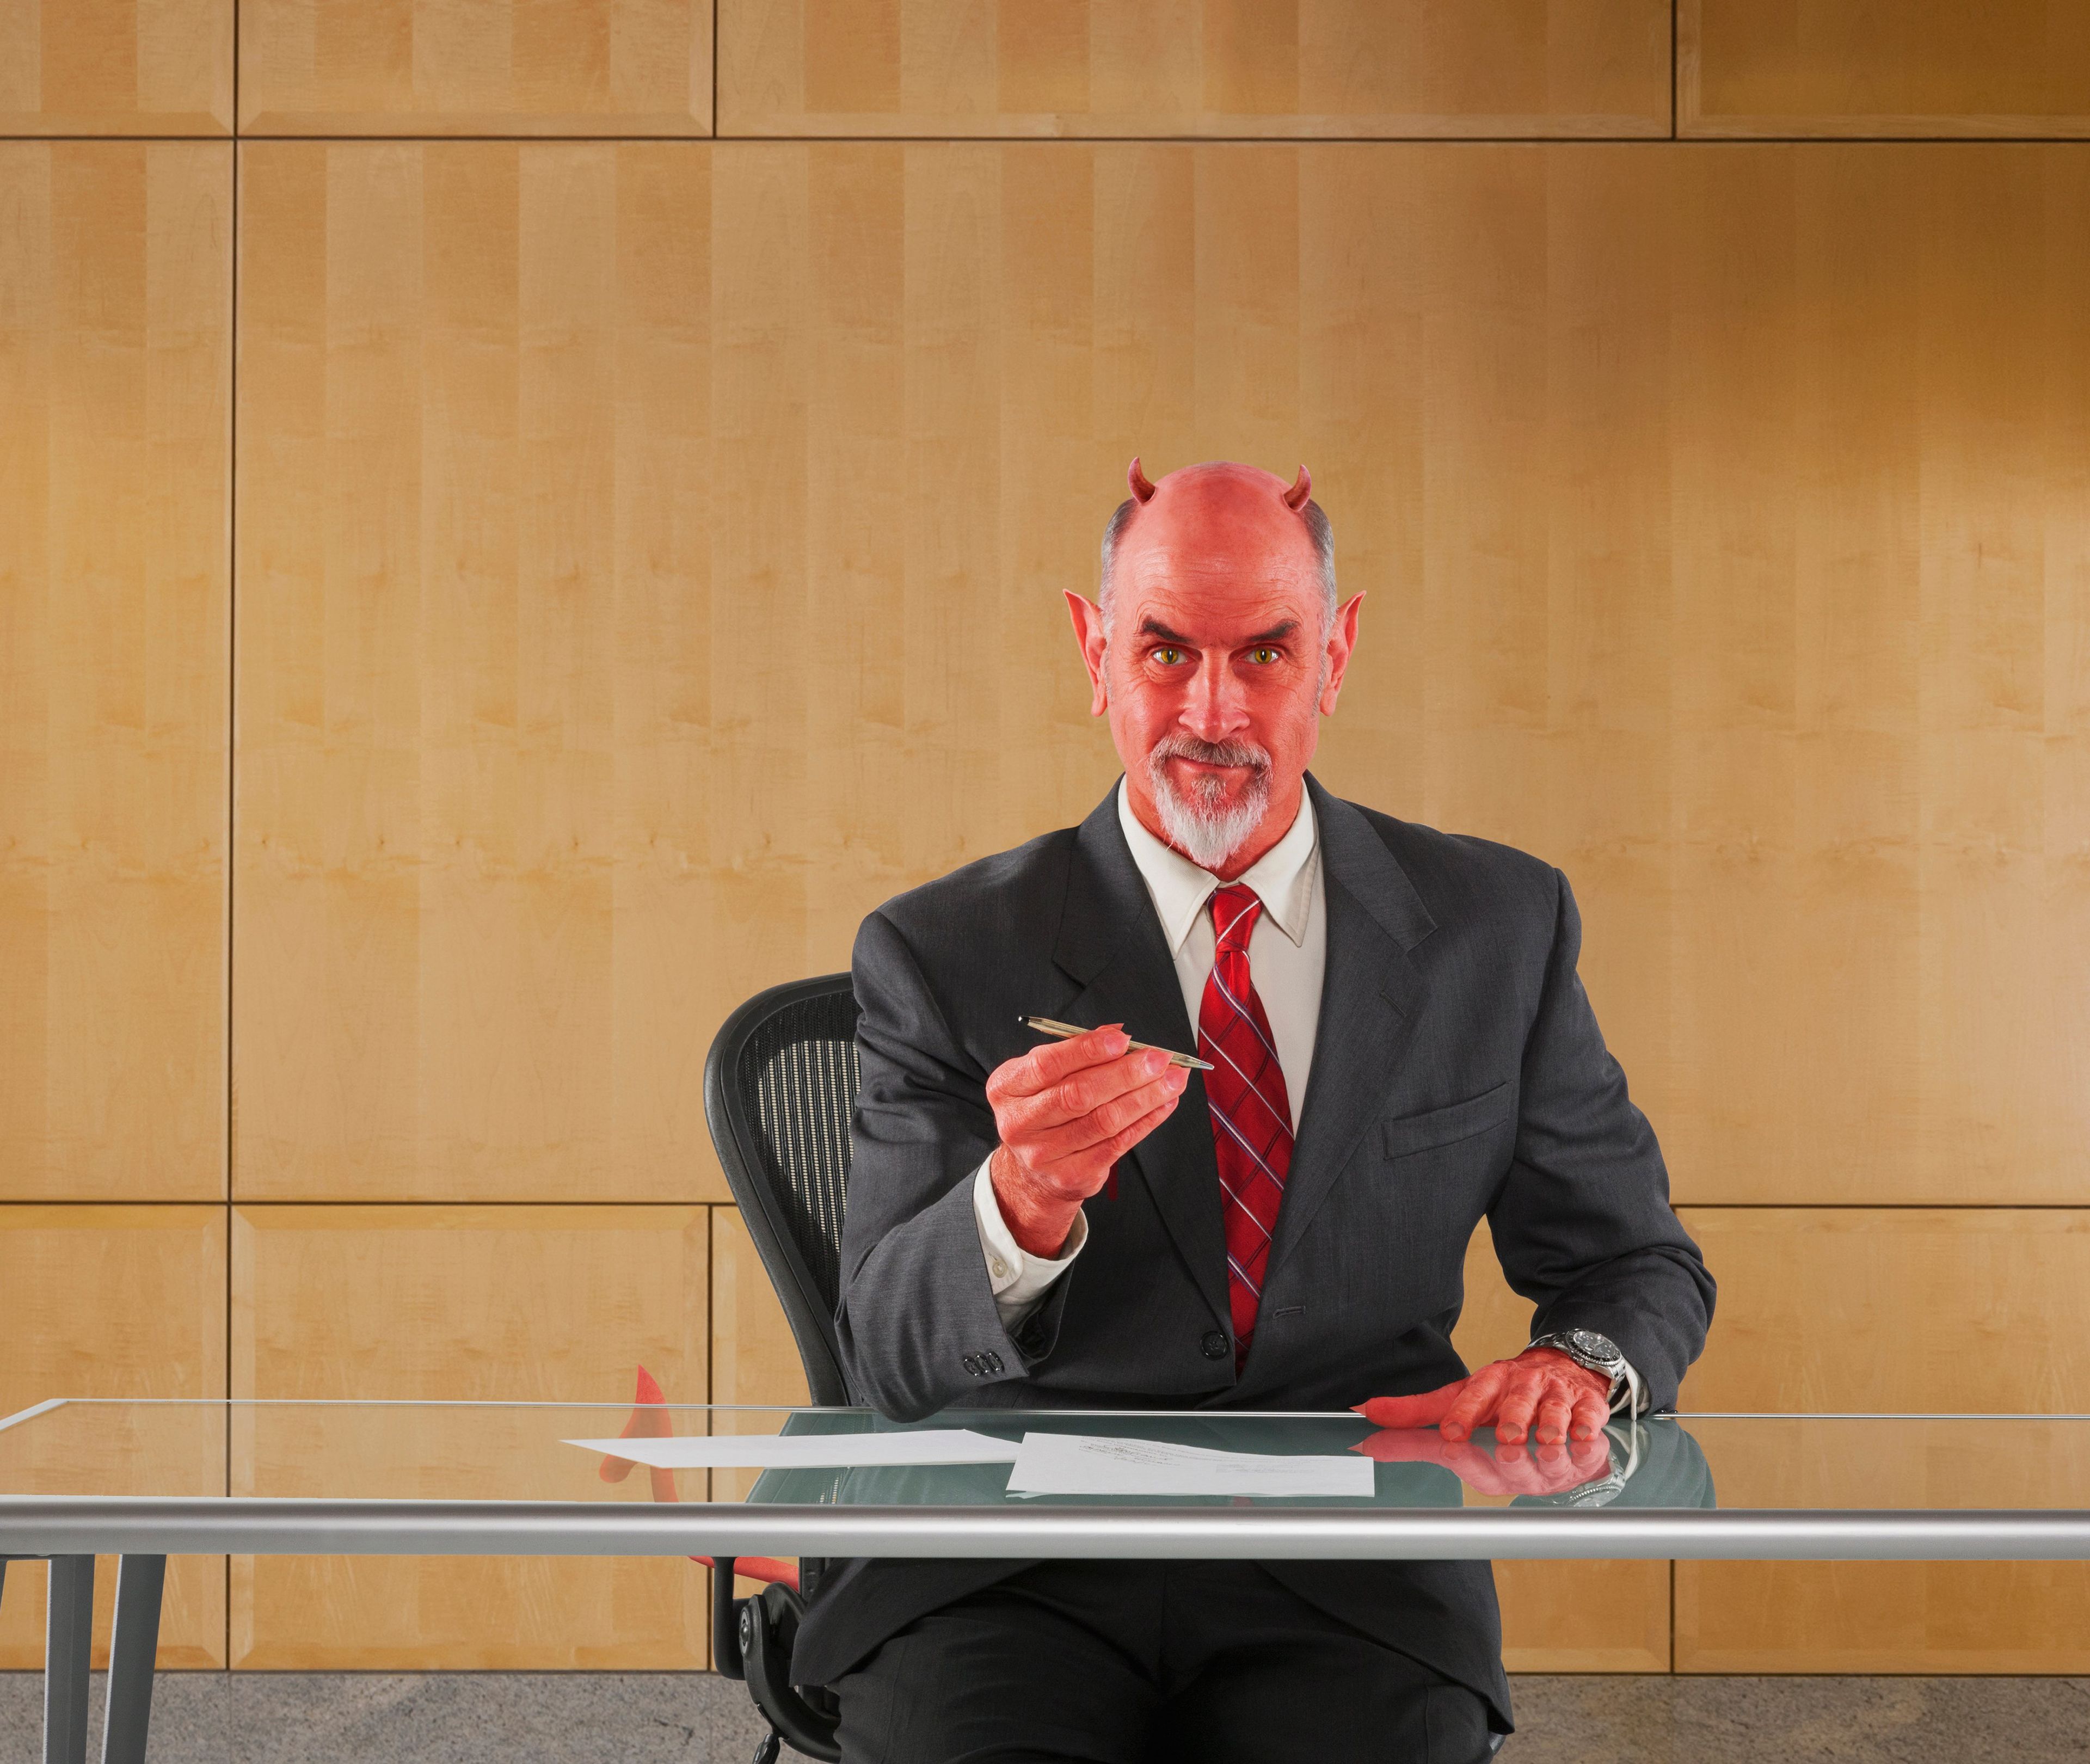 Caucasian businessman in devil costume offering pen to sign contract